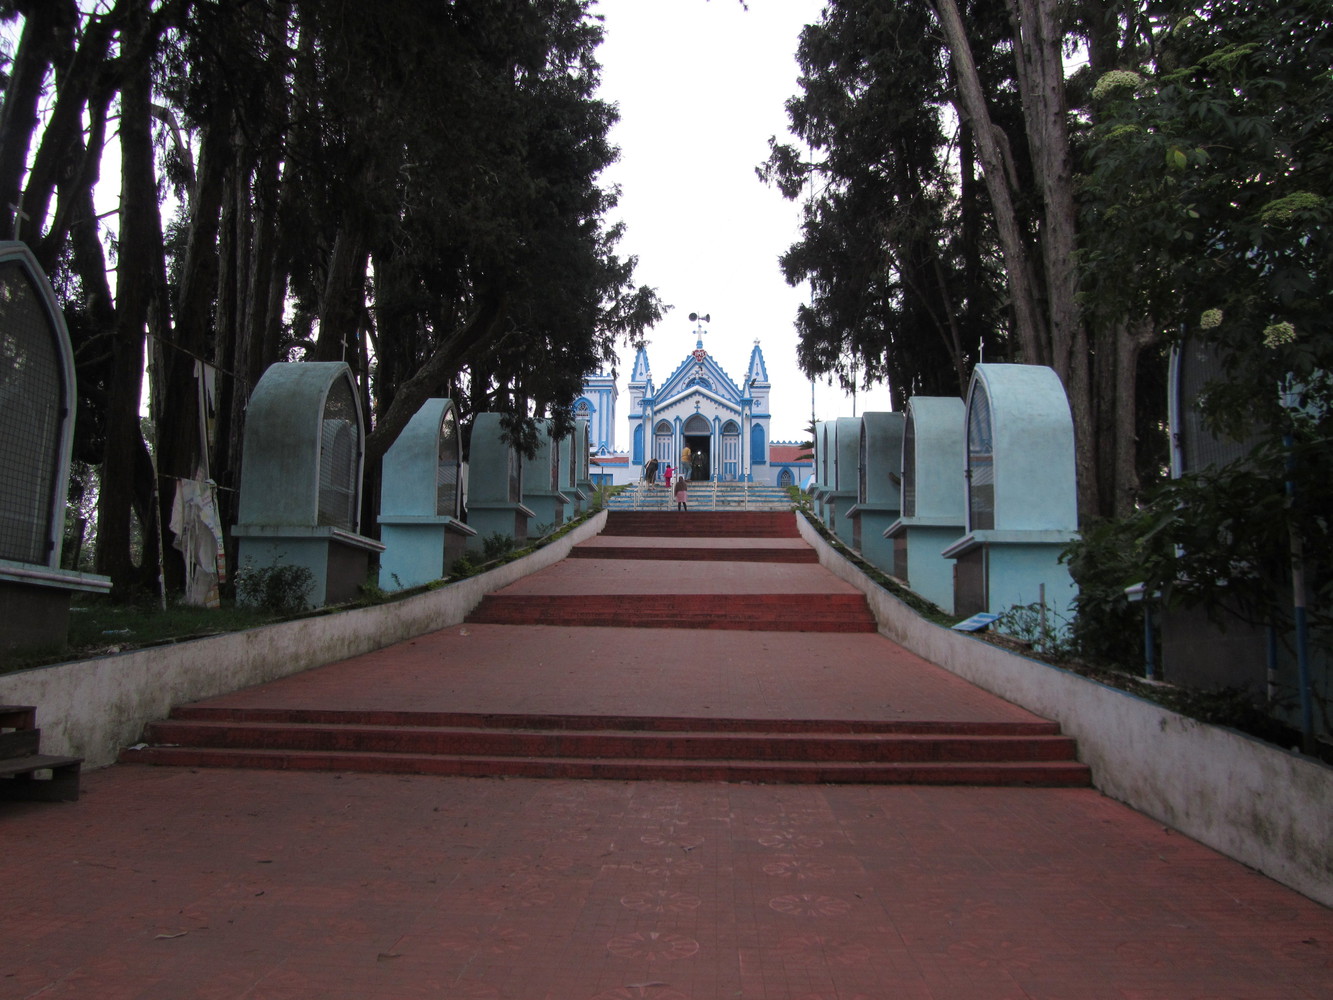 An ascending paved path leading to a church